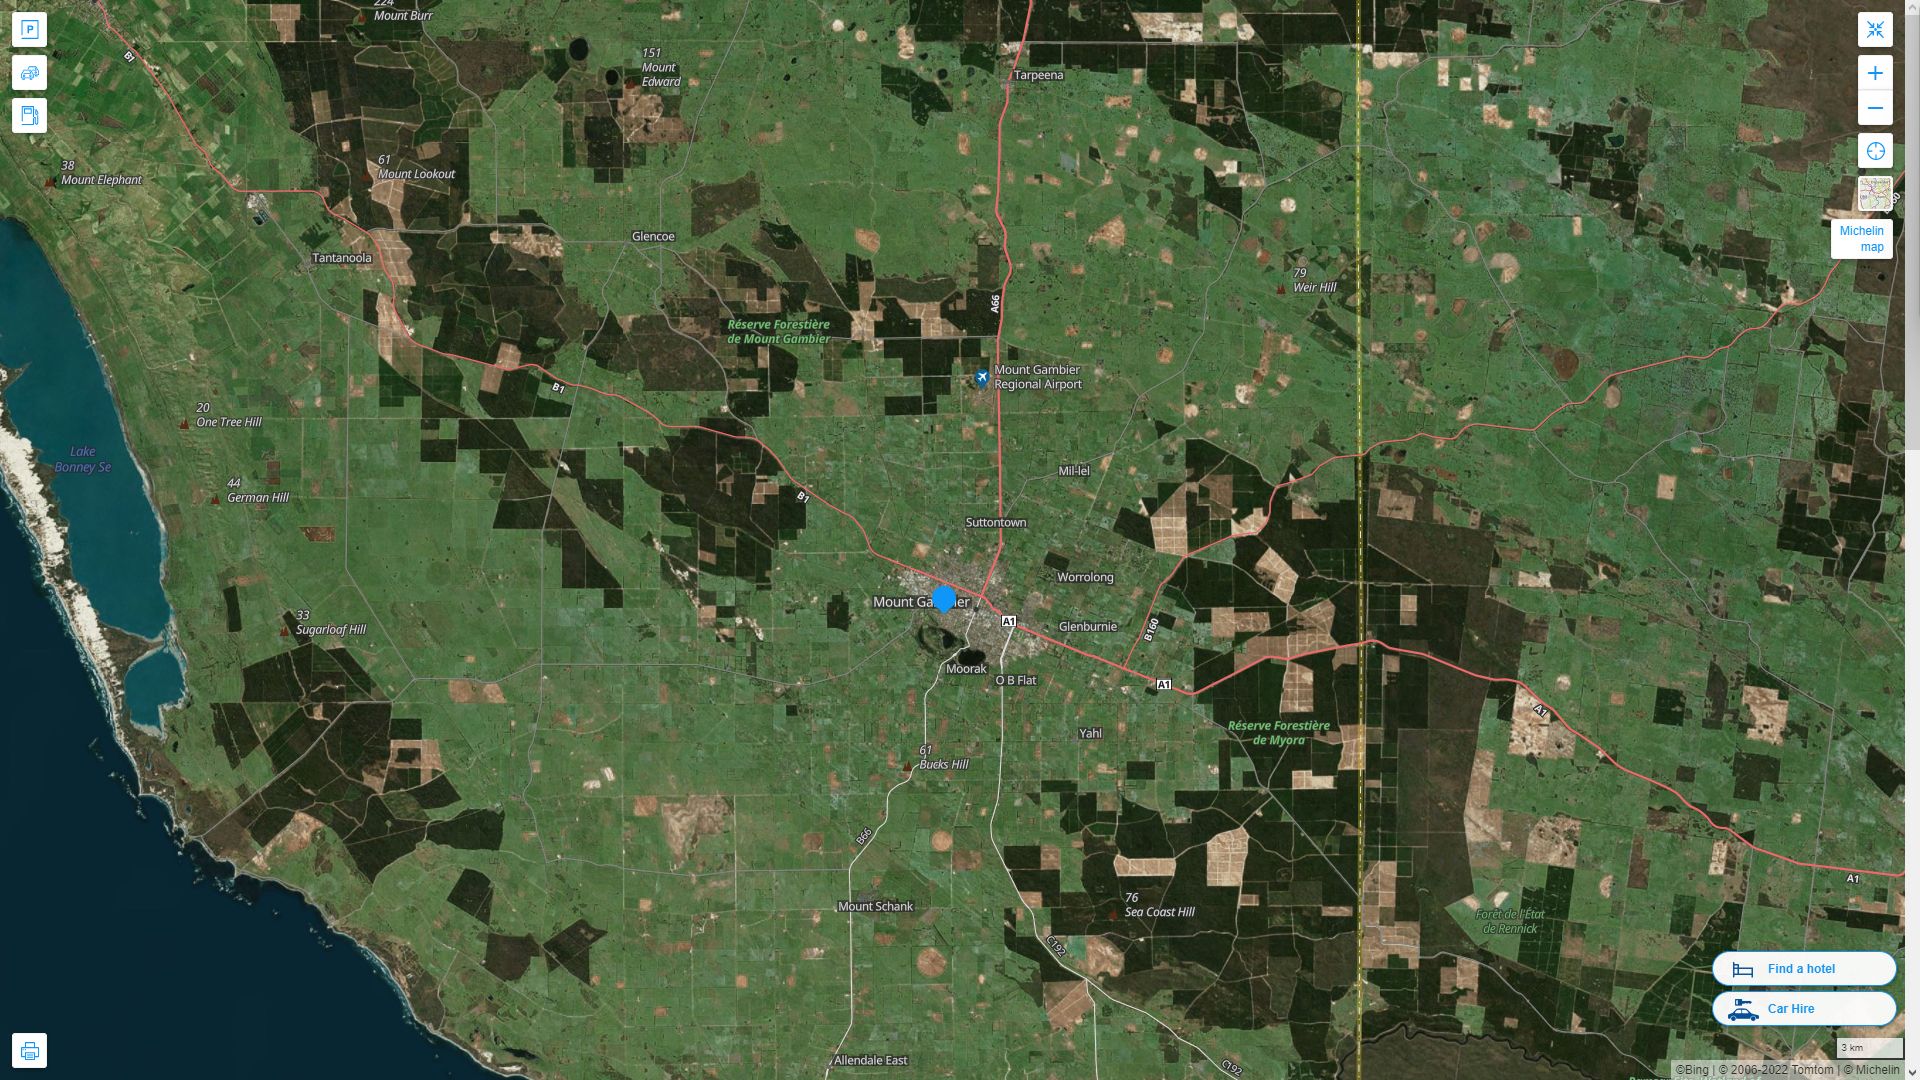 Mount Gambier Highway and Road Map with Satellite View